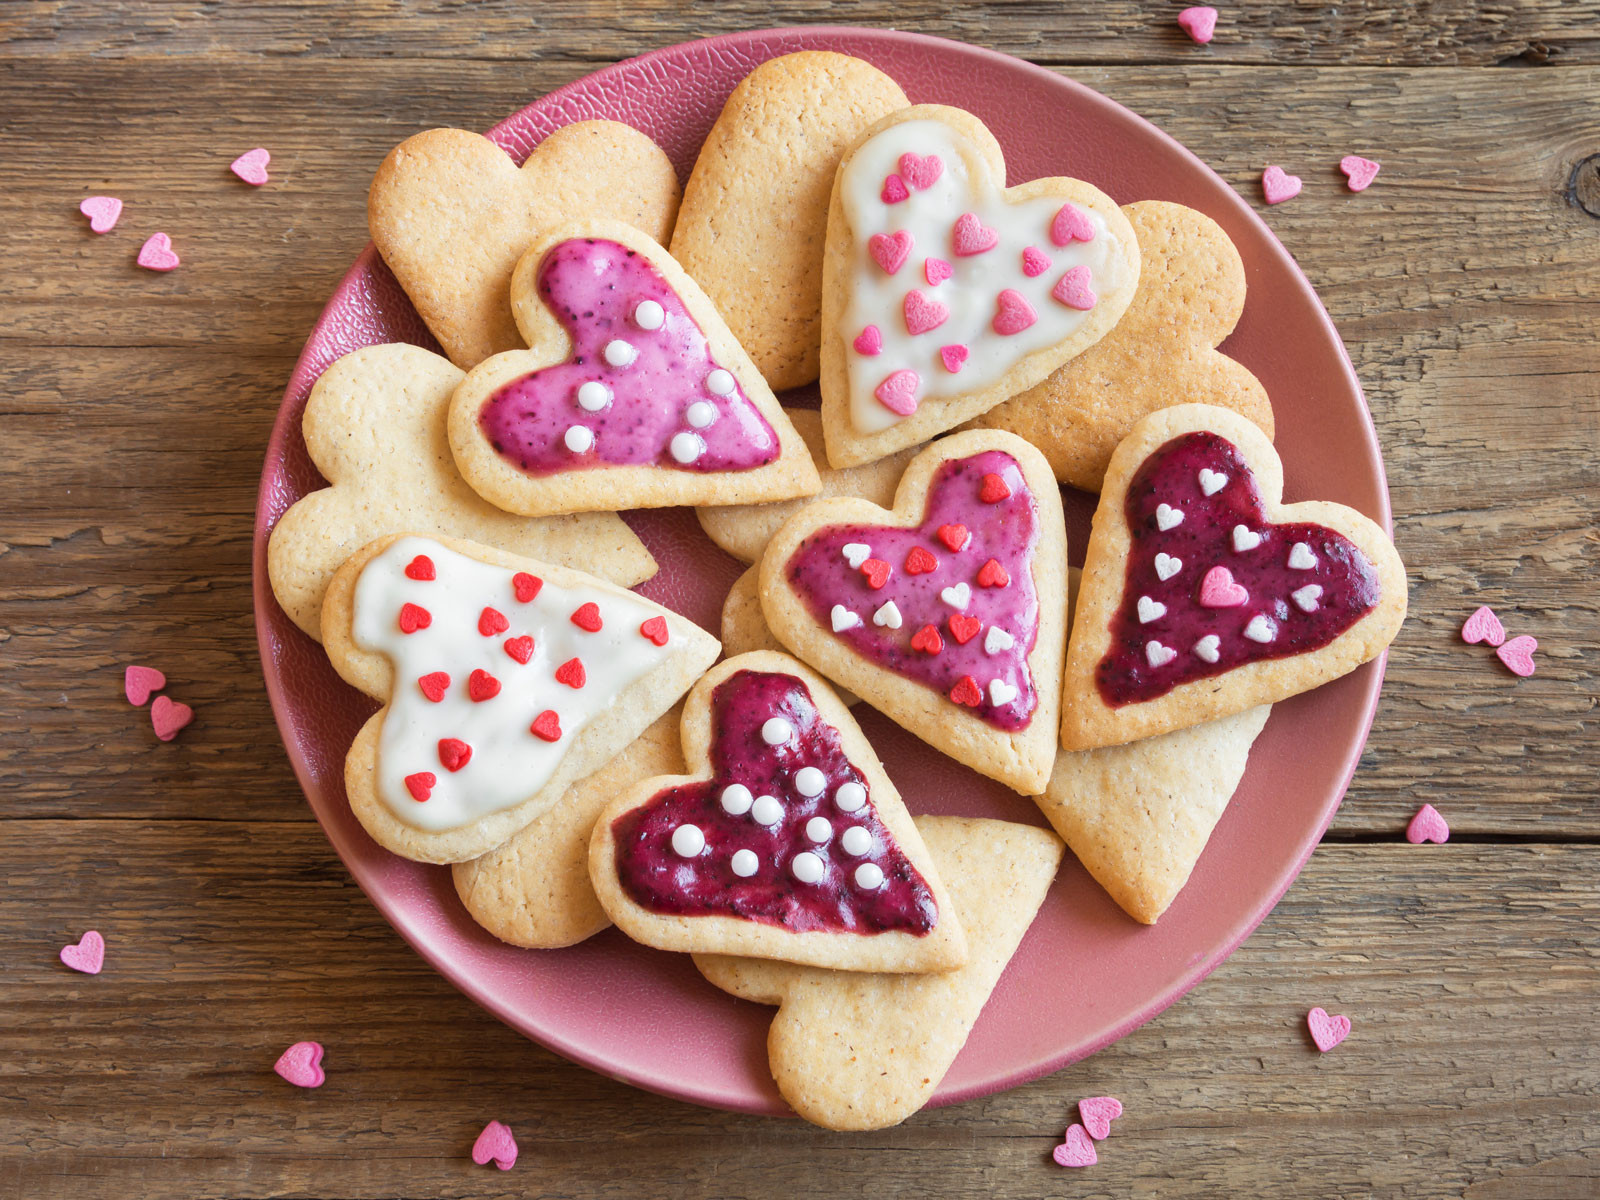 Valentines Day Food Deals Best Of Valentine’s Day Deals where to Find Free Food and Other